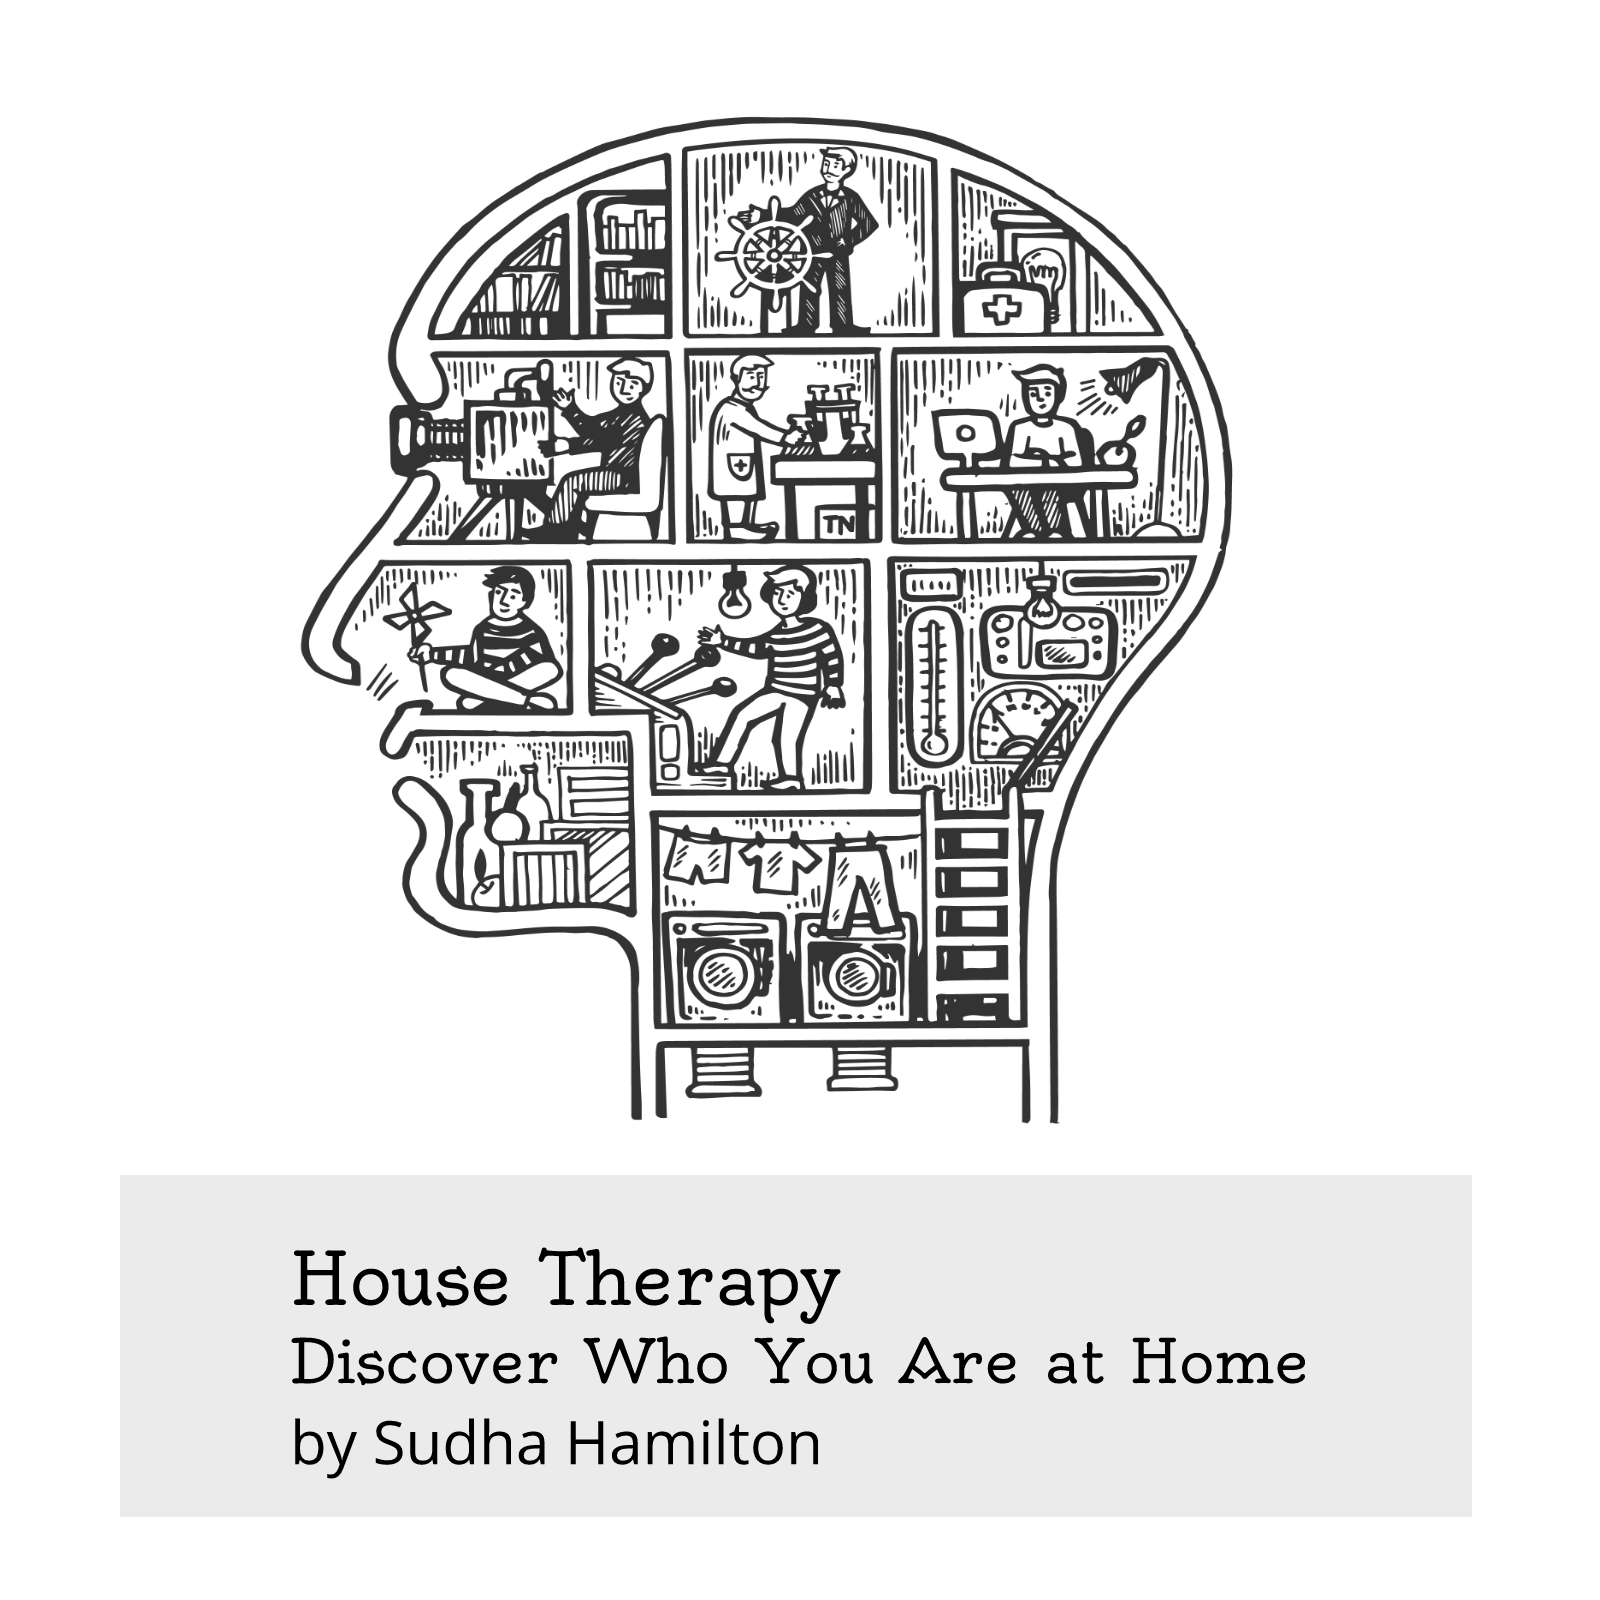 House Therapy book cover